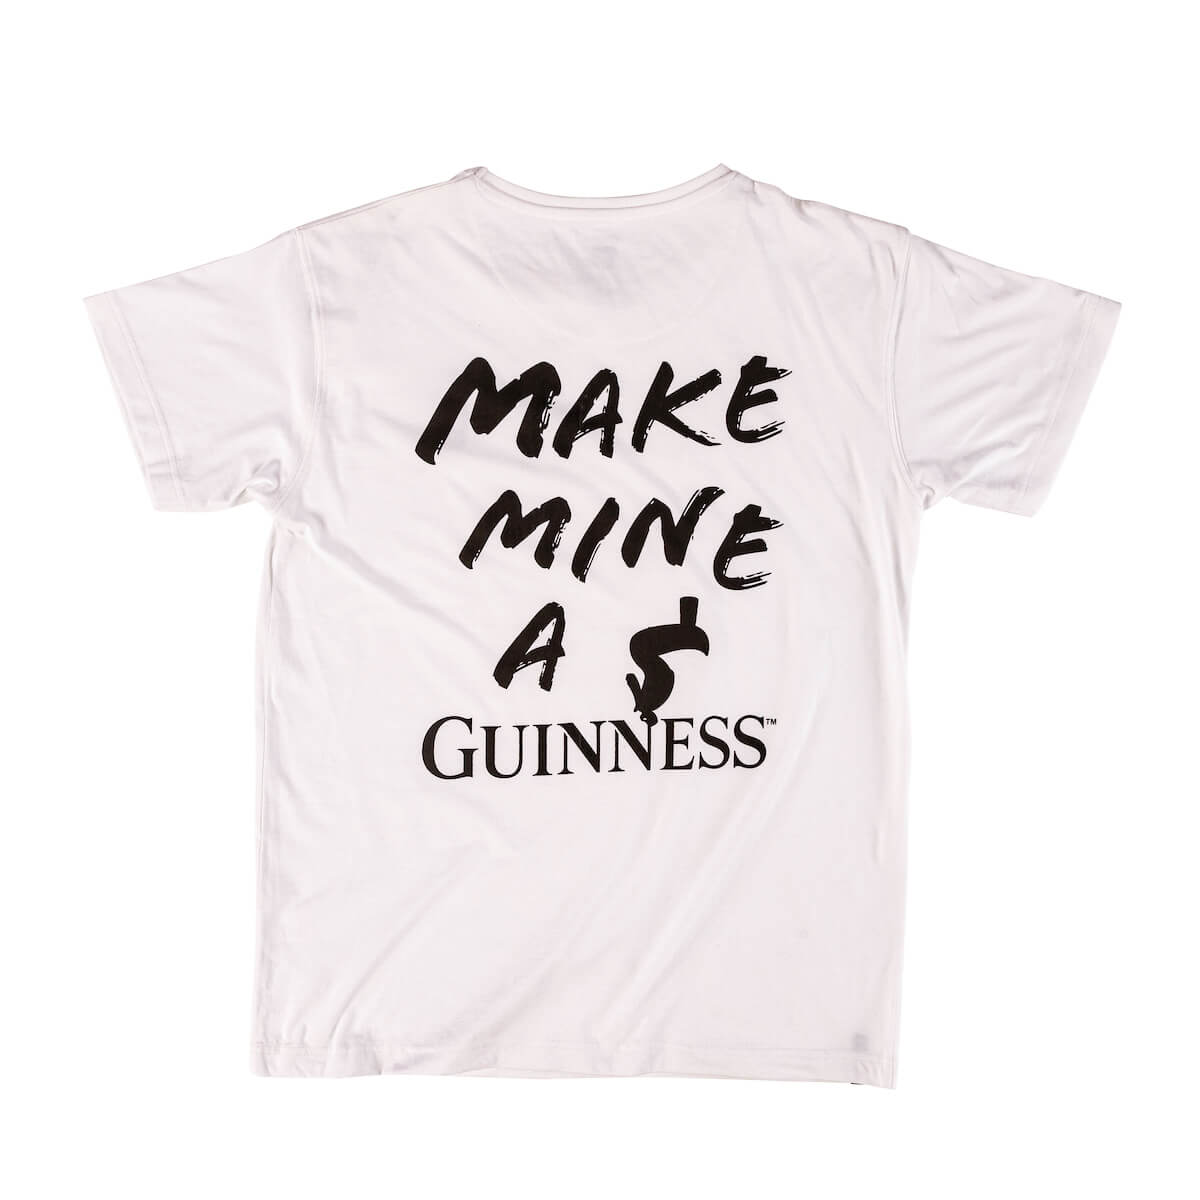 Guinness Storehouse Exclusive BCI Cotton White T-Shirt Make Mine a Pint Toucan 